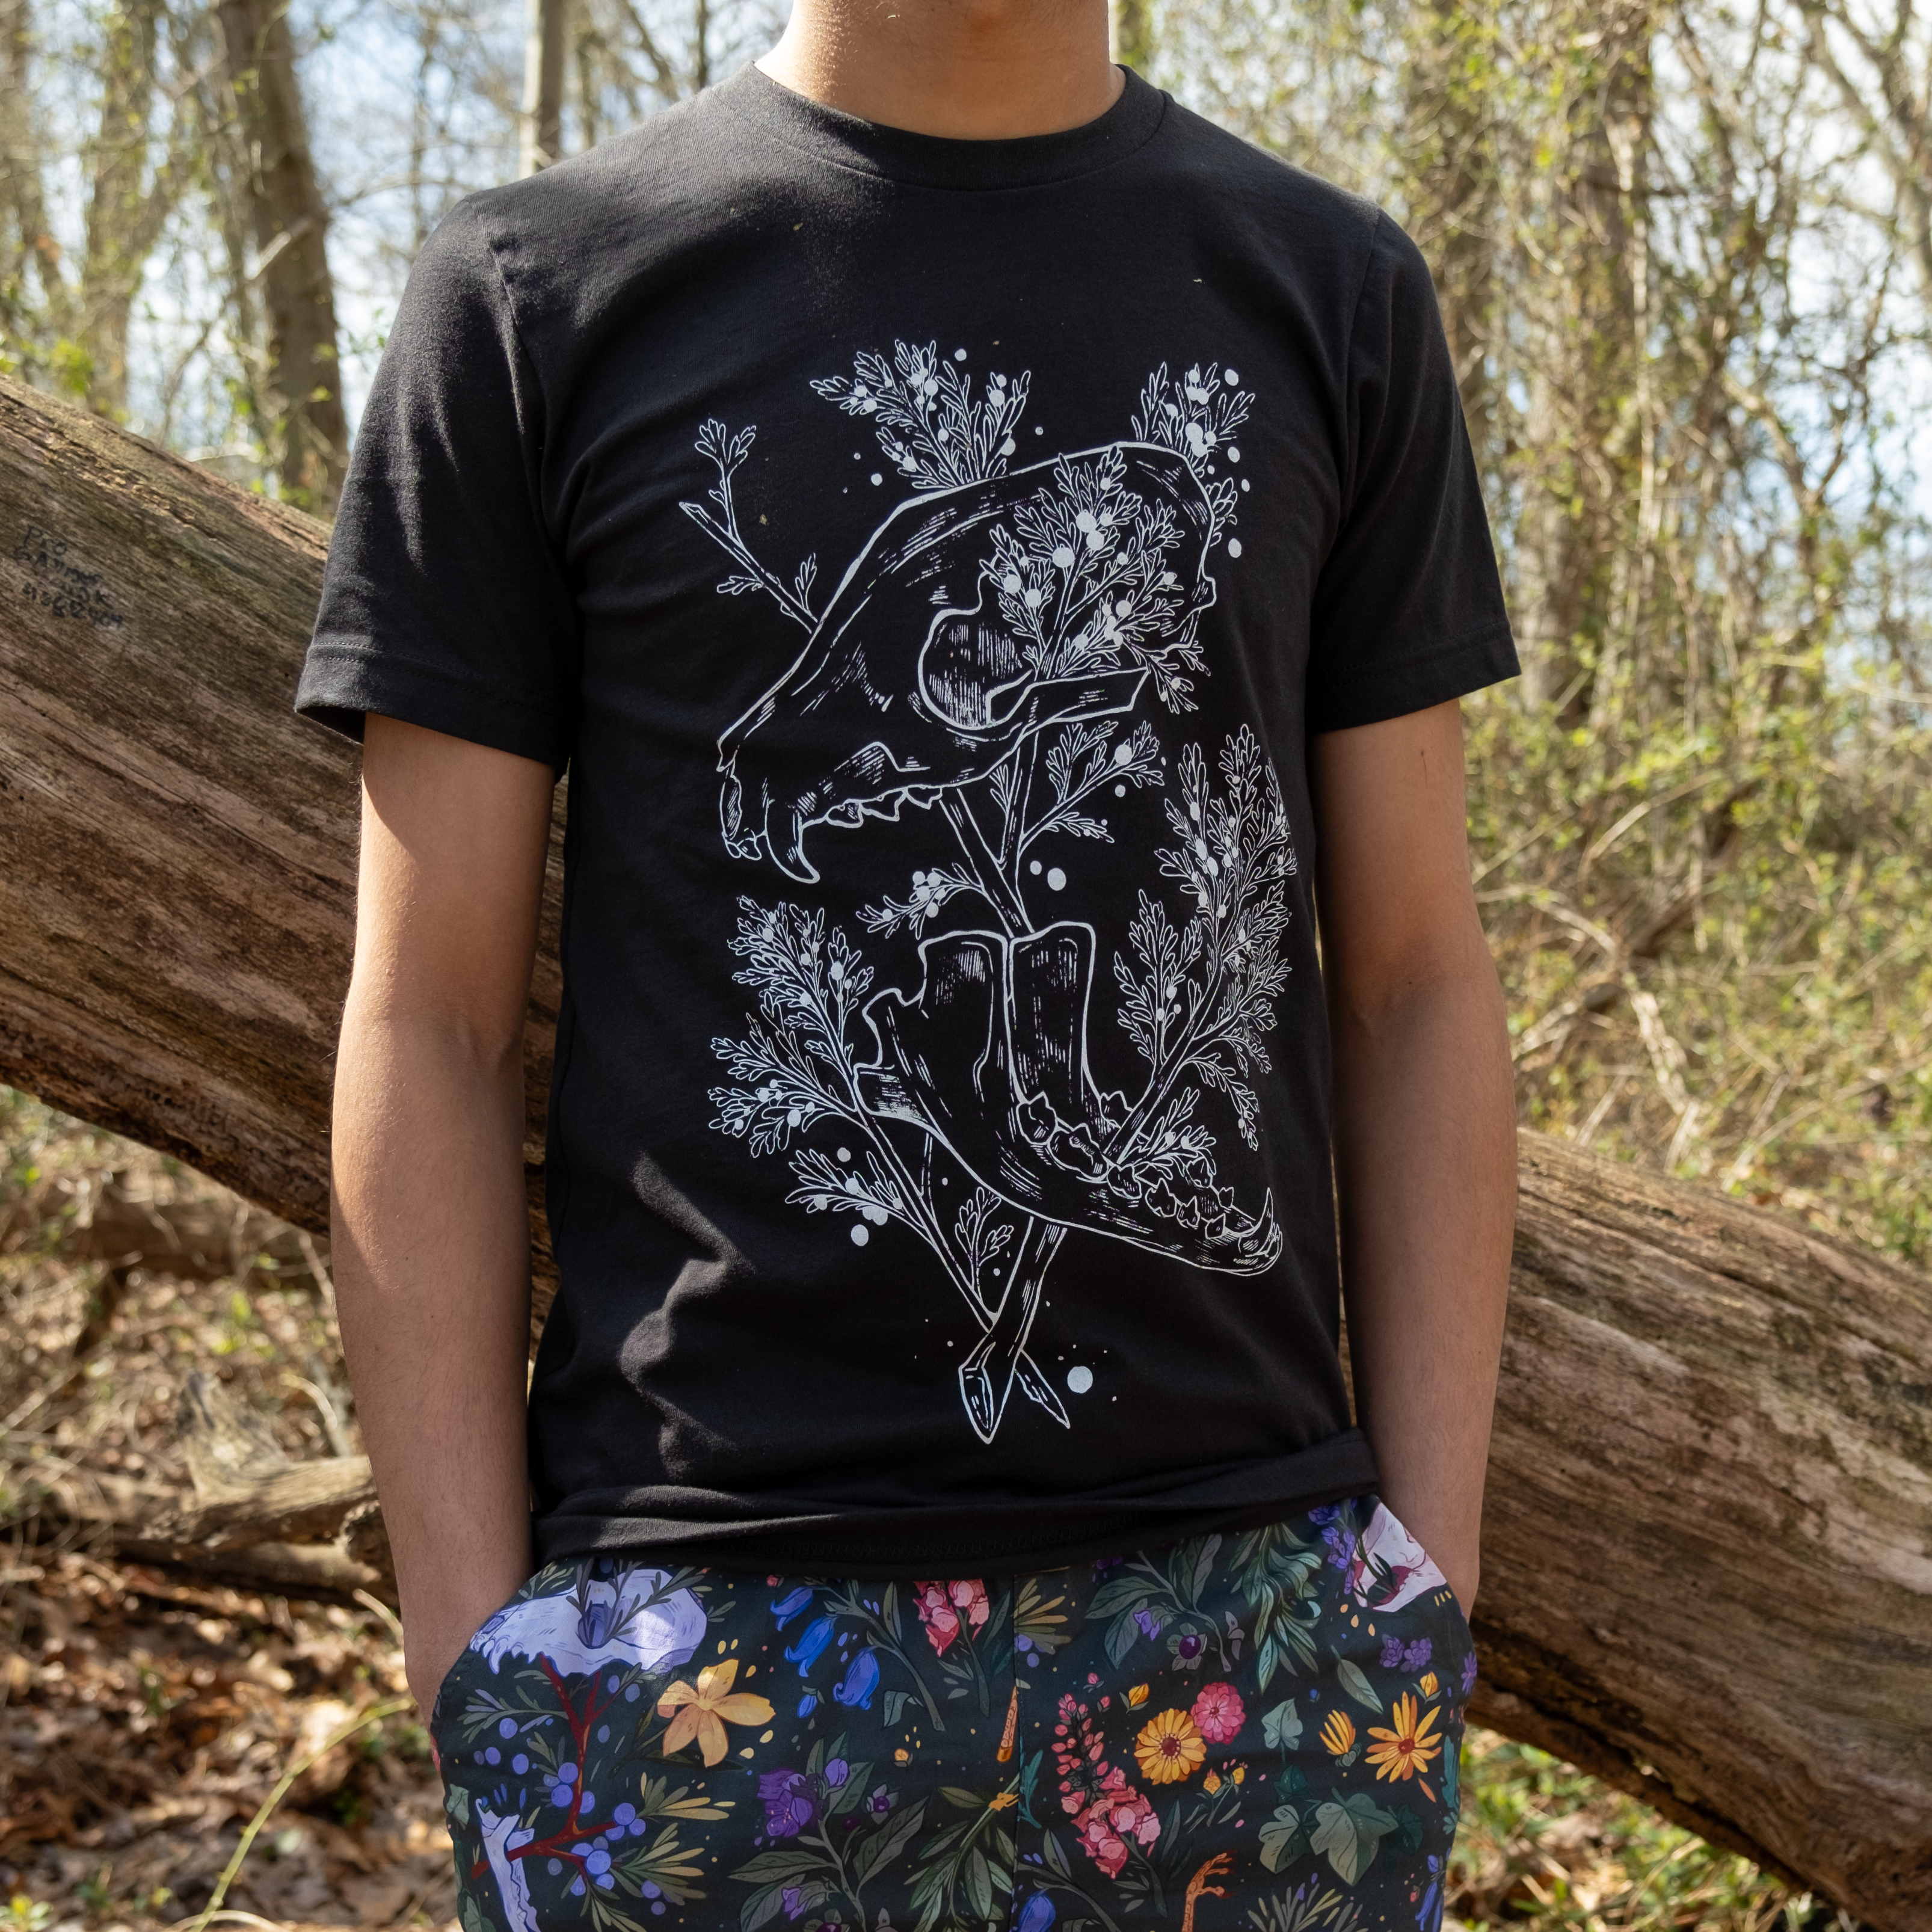 [SCREENPRINTED TEE SHIRT] Witch's Garden **WILL SHIP AFTER 3/27